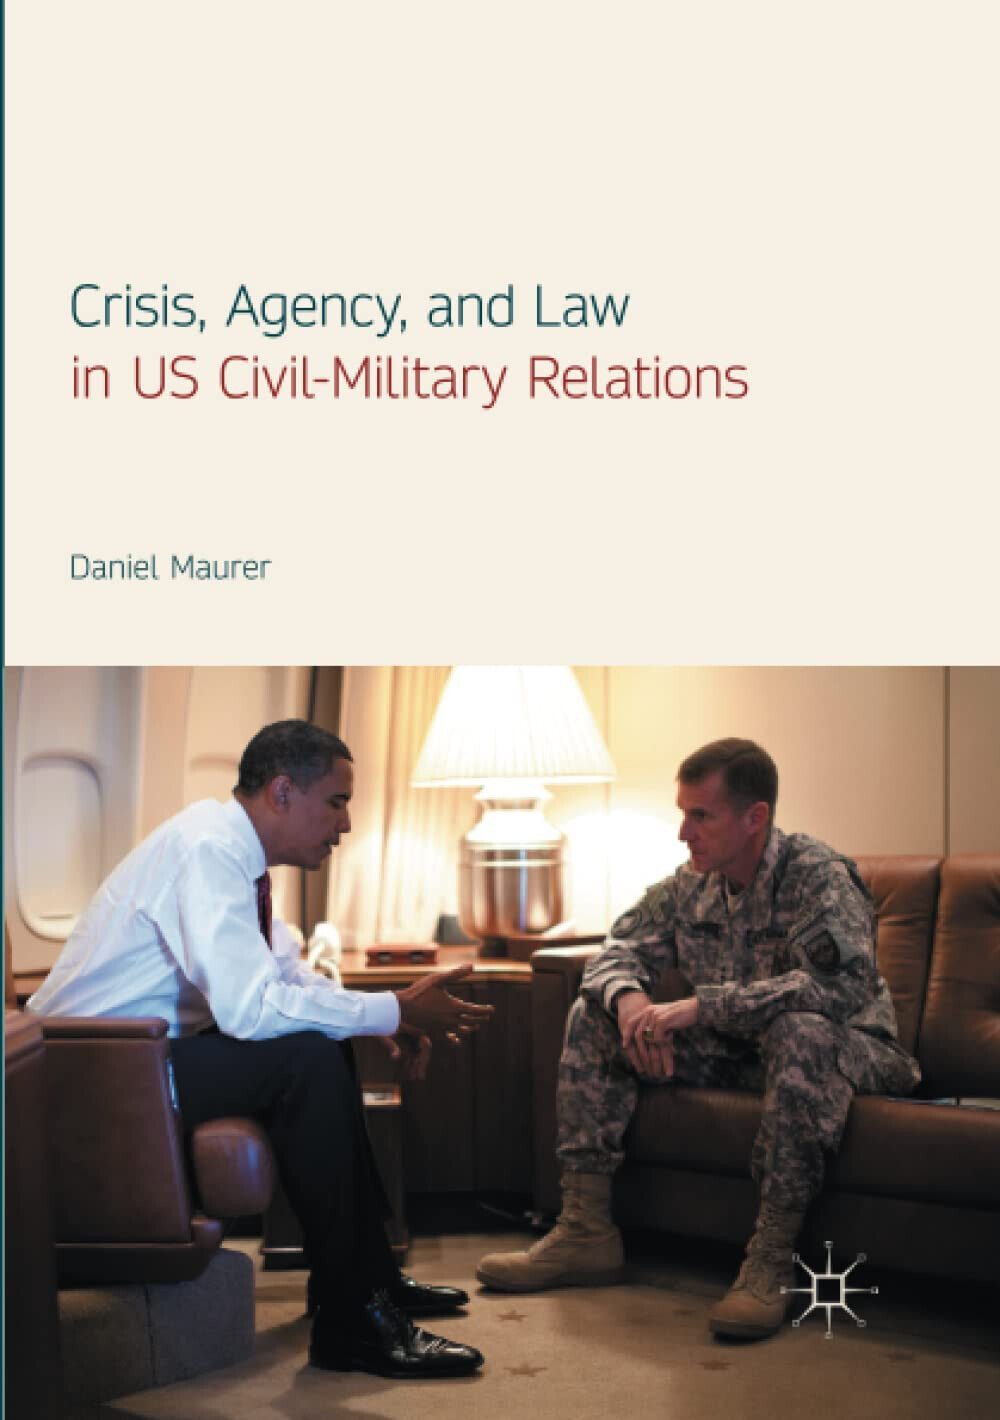 Crisis, Agency, and Law in US Civil-Military Relations - Daniel Maurer - 2018 libro usato